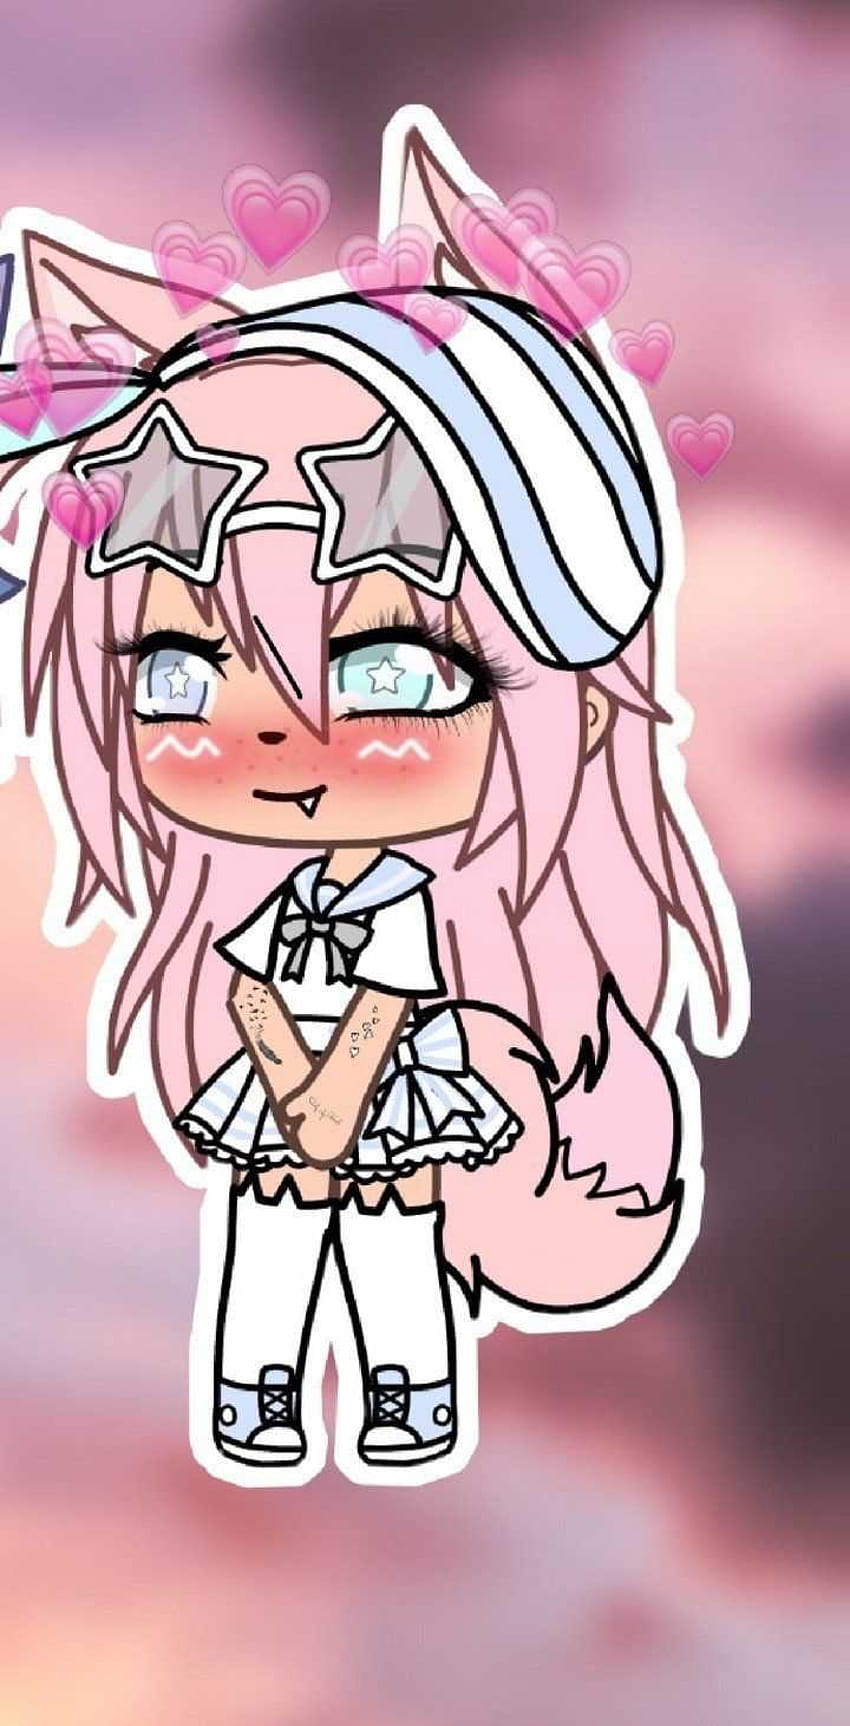 A cute anime girl with pink hair and white dress - Toca Boca